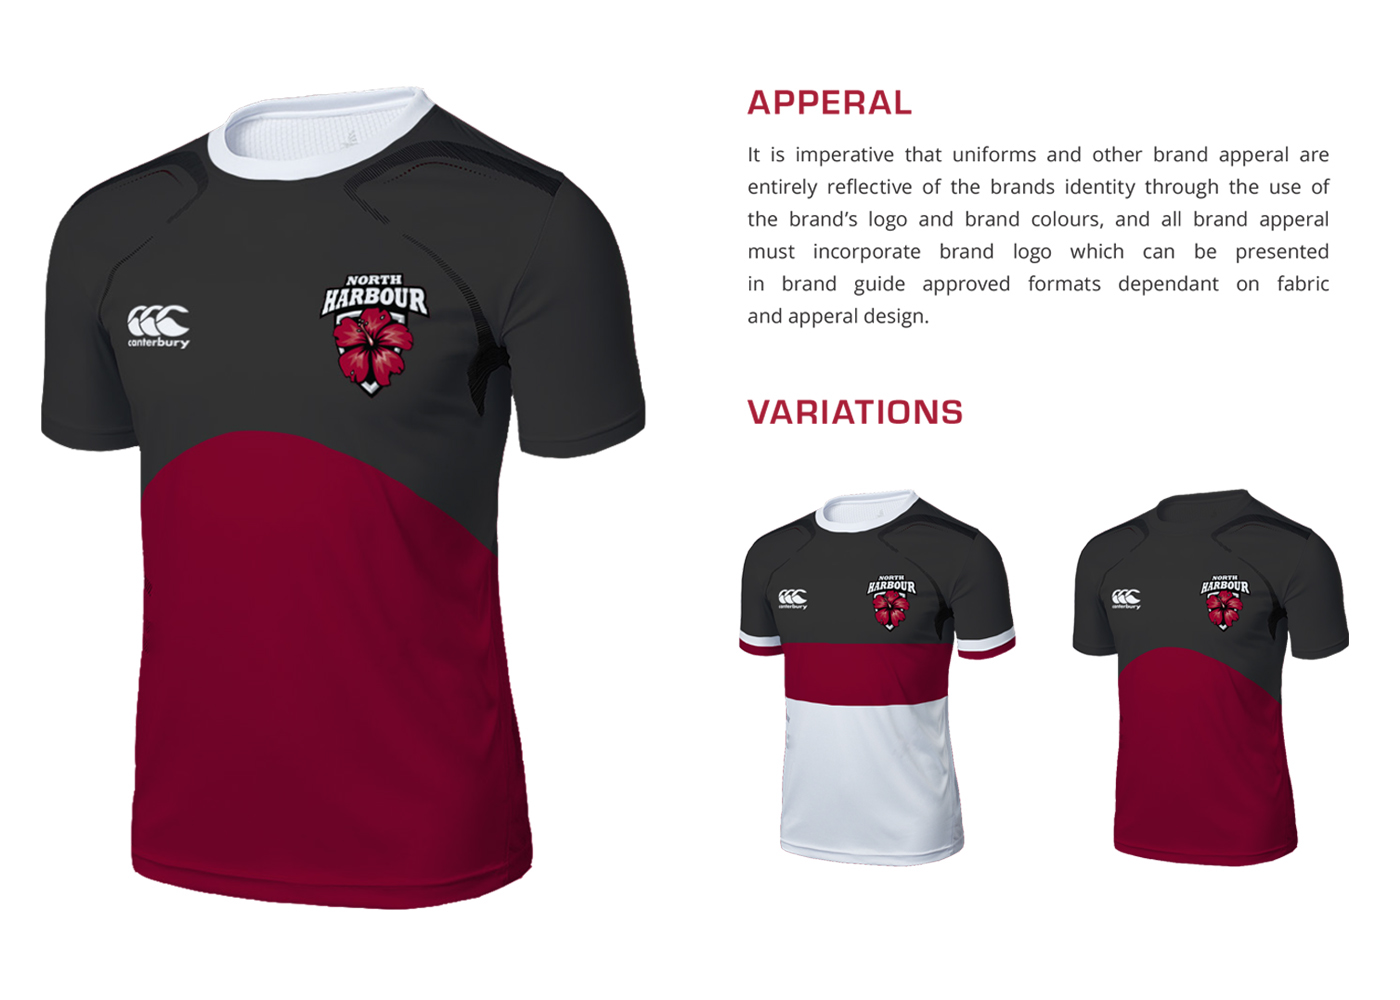 North Harbour Rugby Logo Design branding  Sports logo Sports Team hibiscus rugby team re-brand